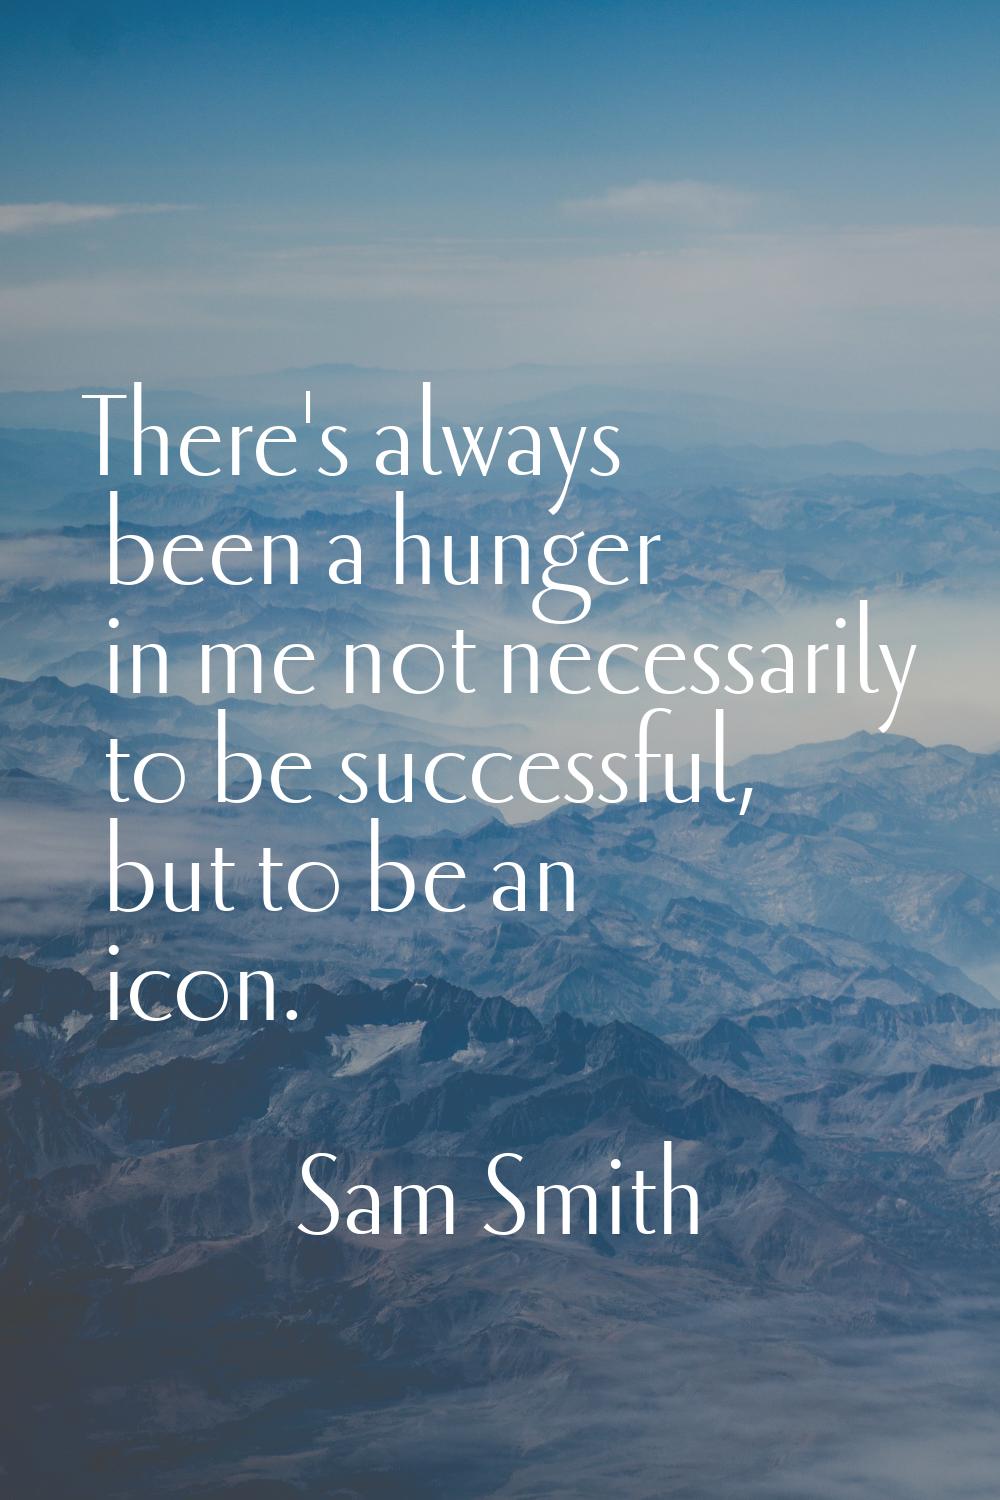 There's always been a hunger in me not necessarily to be successful, but to be an icon.